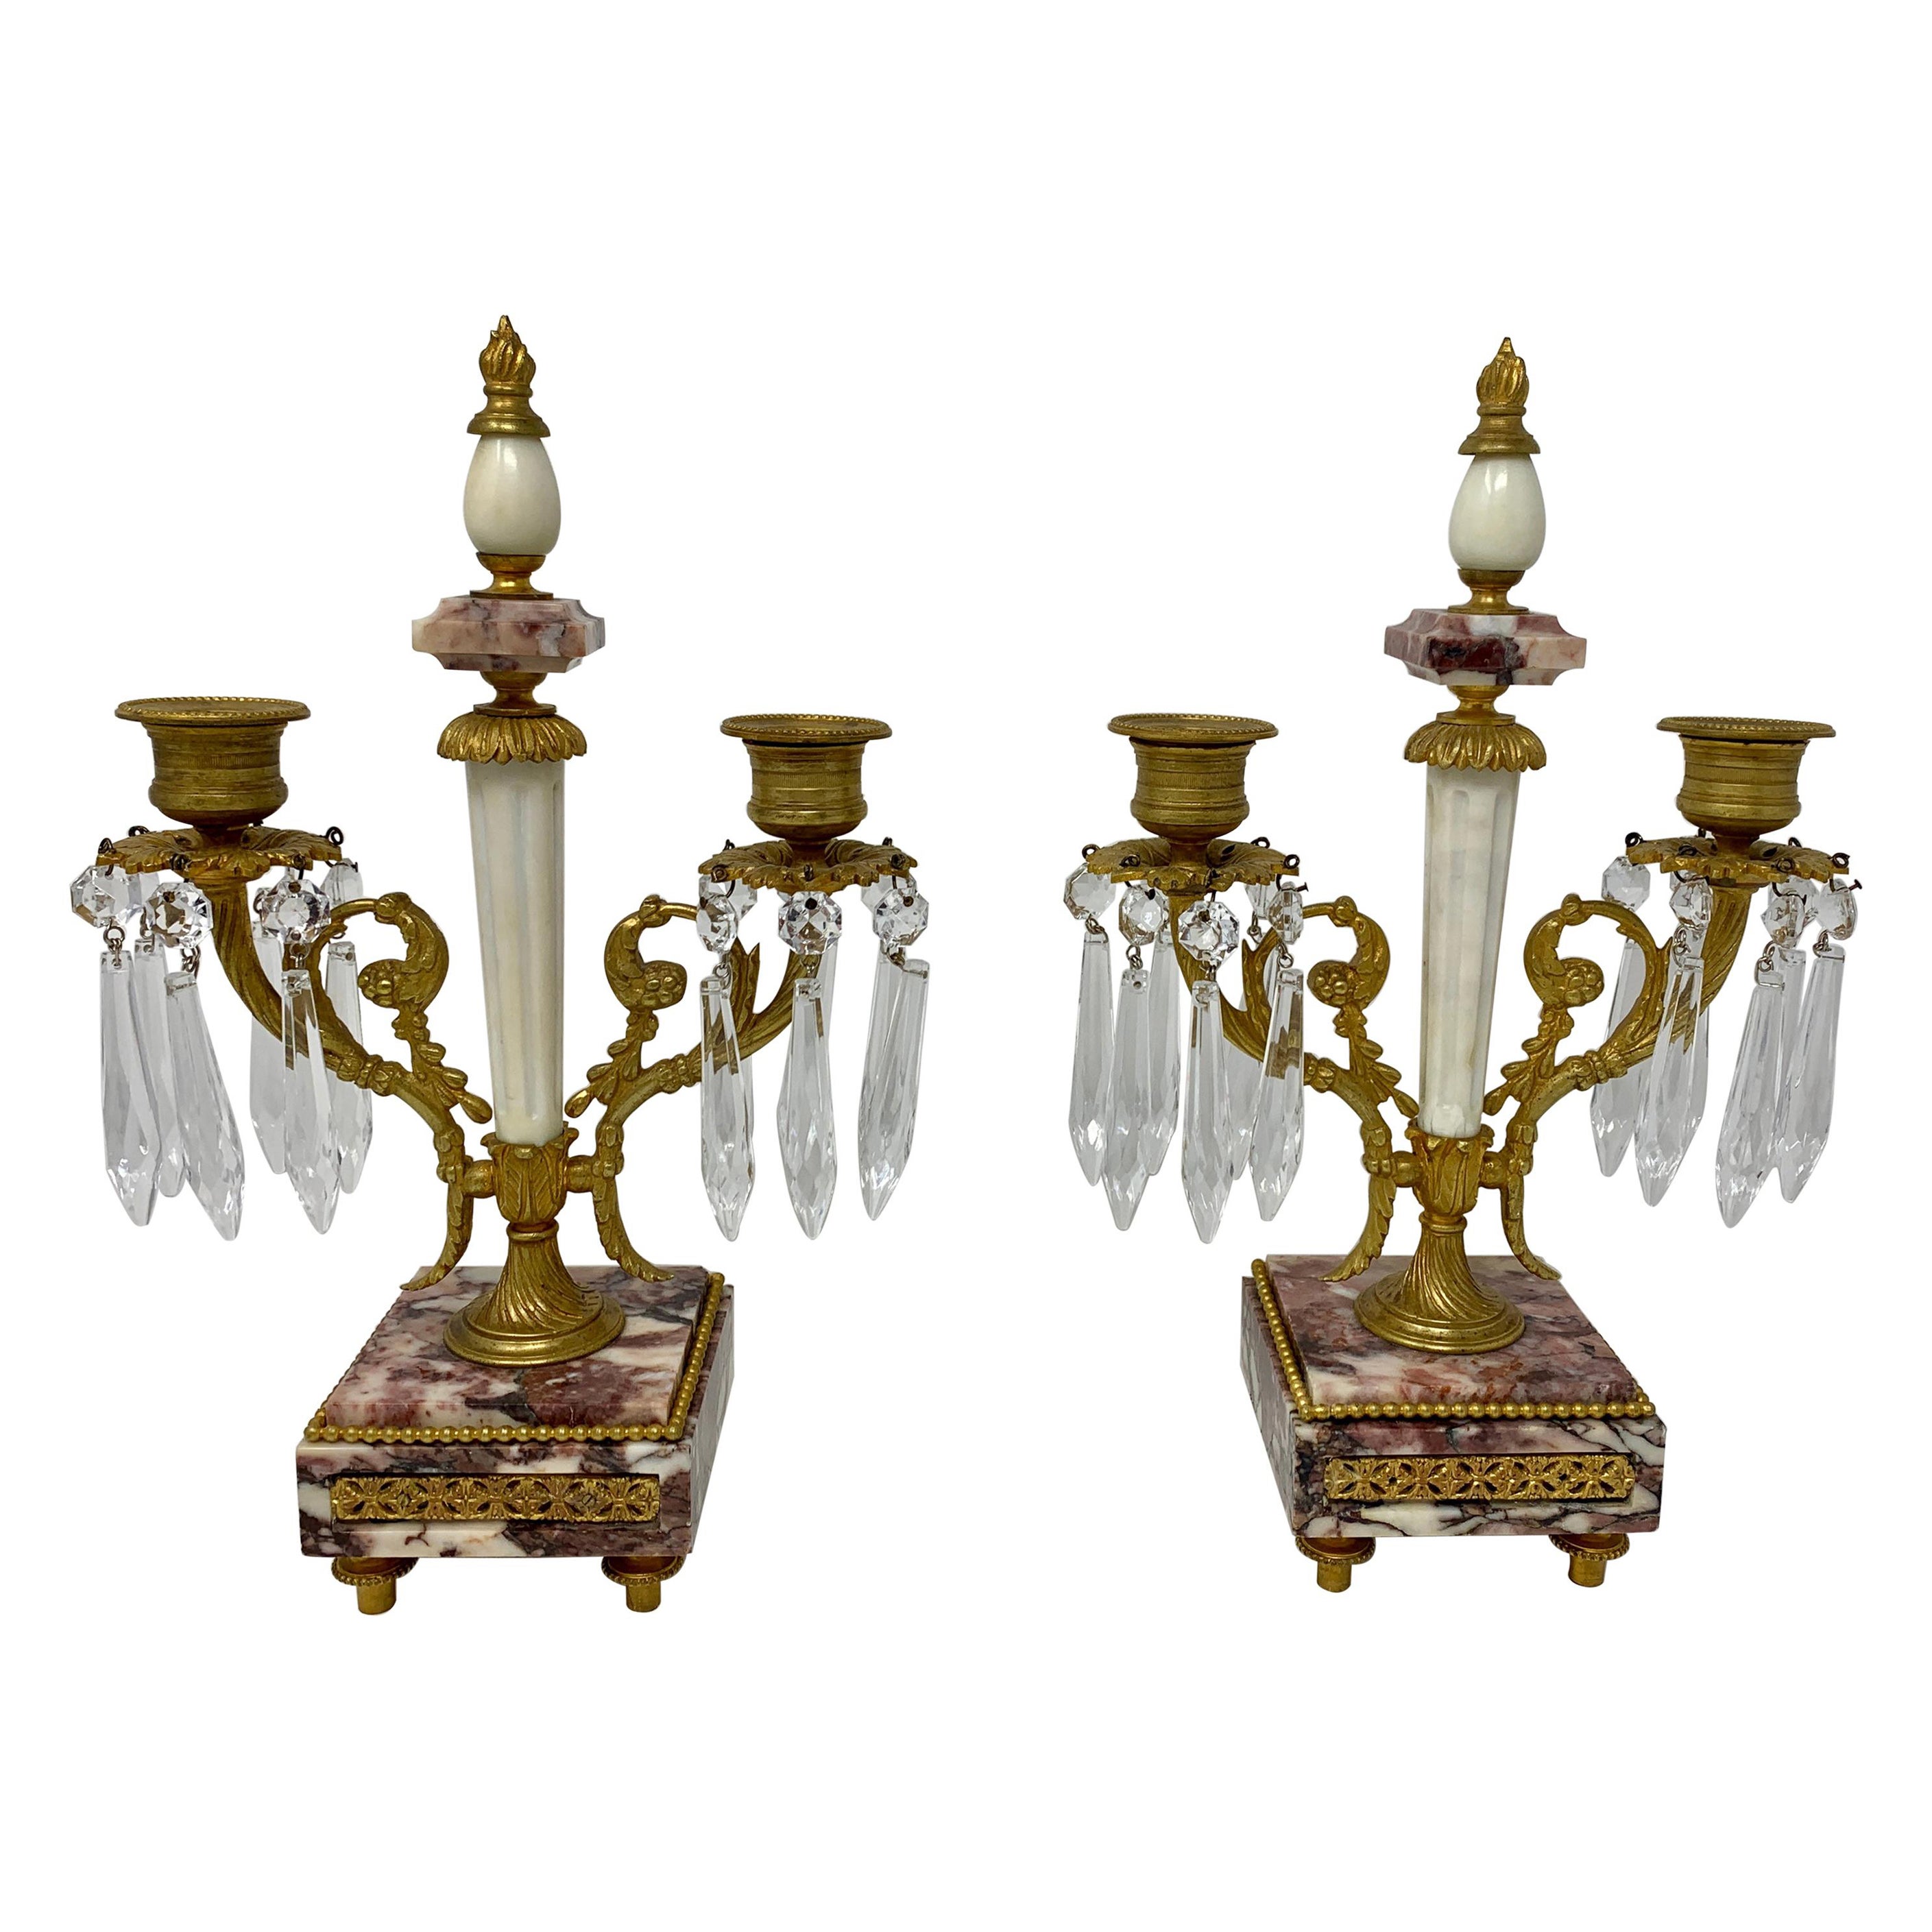 Pair of French Marble, Bronze Doré & Crystal Candlesticks